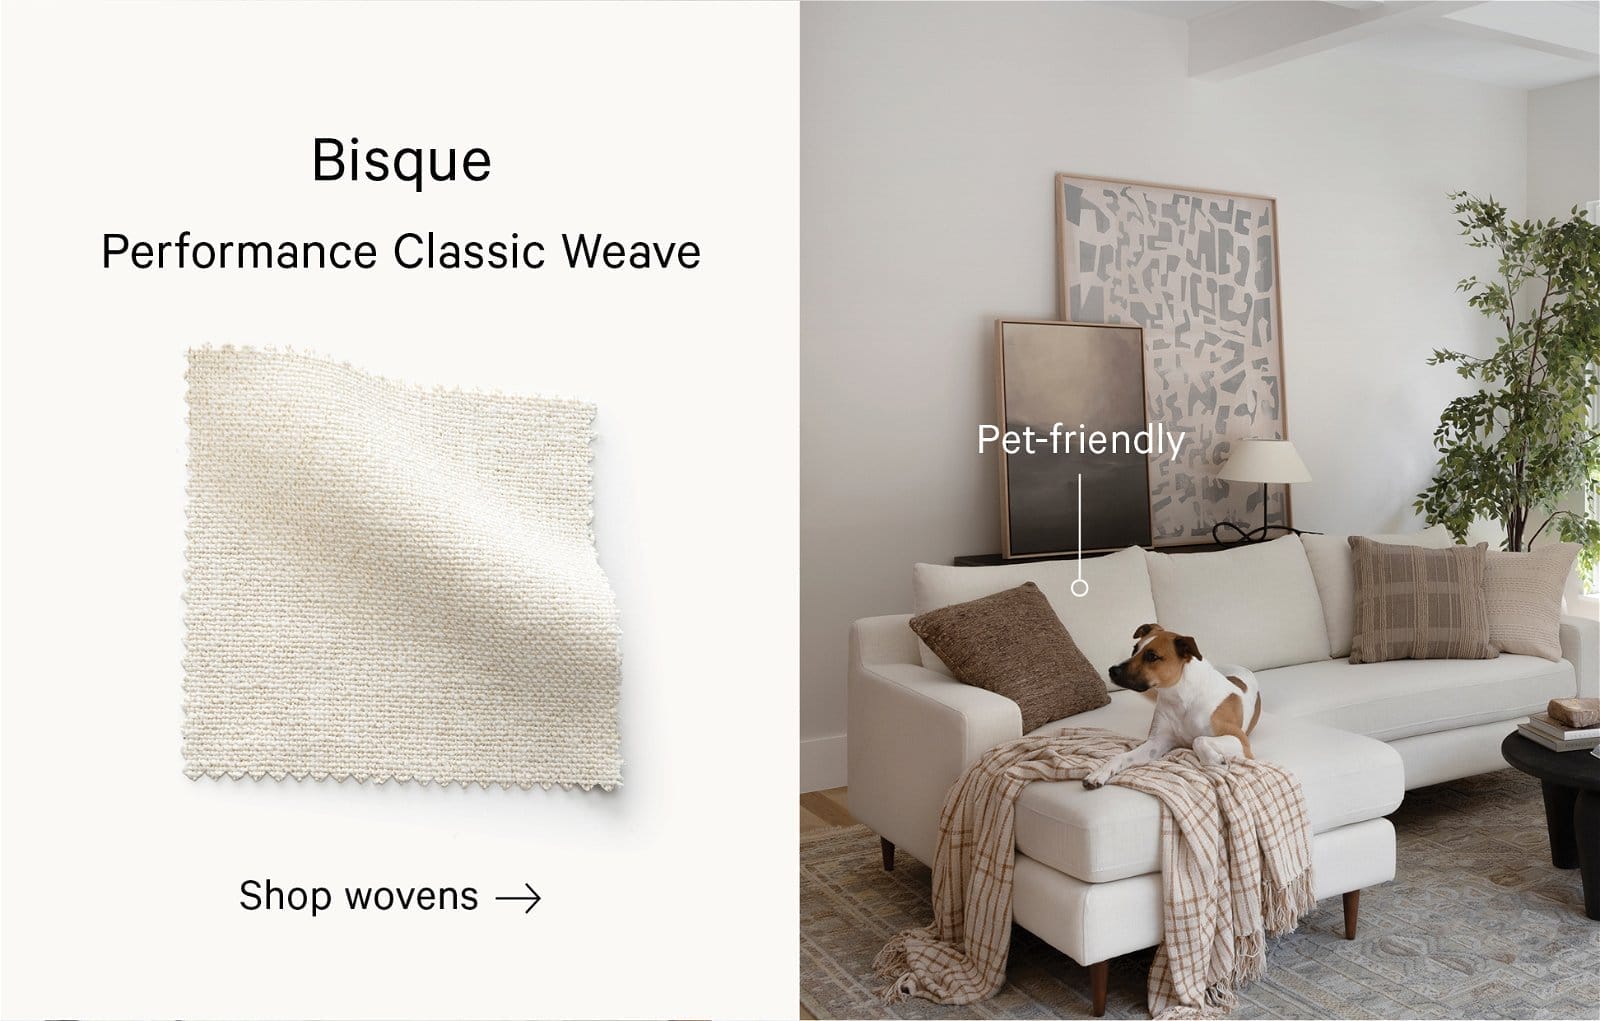 Bisque performance fabric weave. Shop wovens